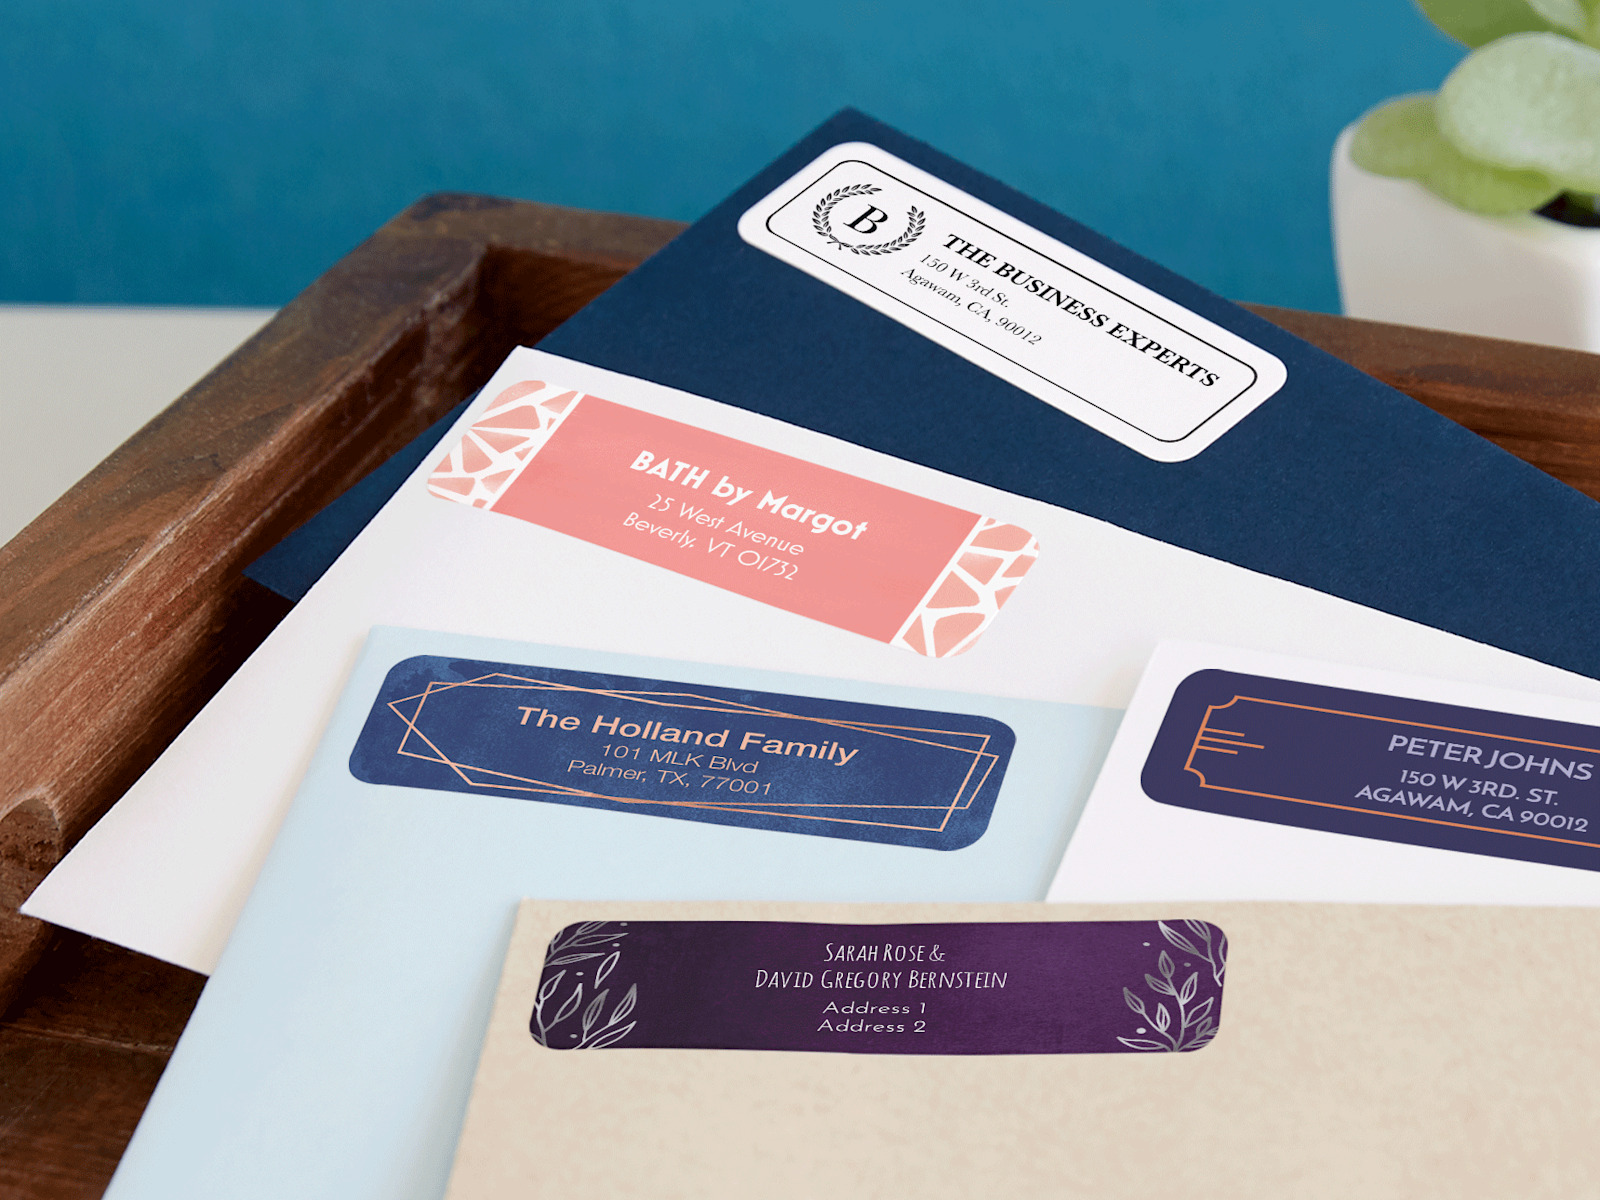 Larger version: Personalized address labels printed on sheets 